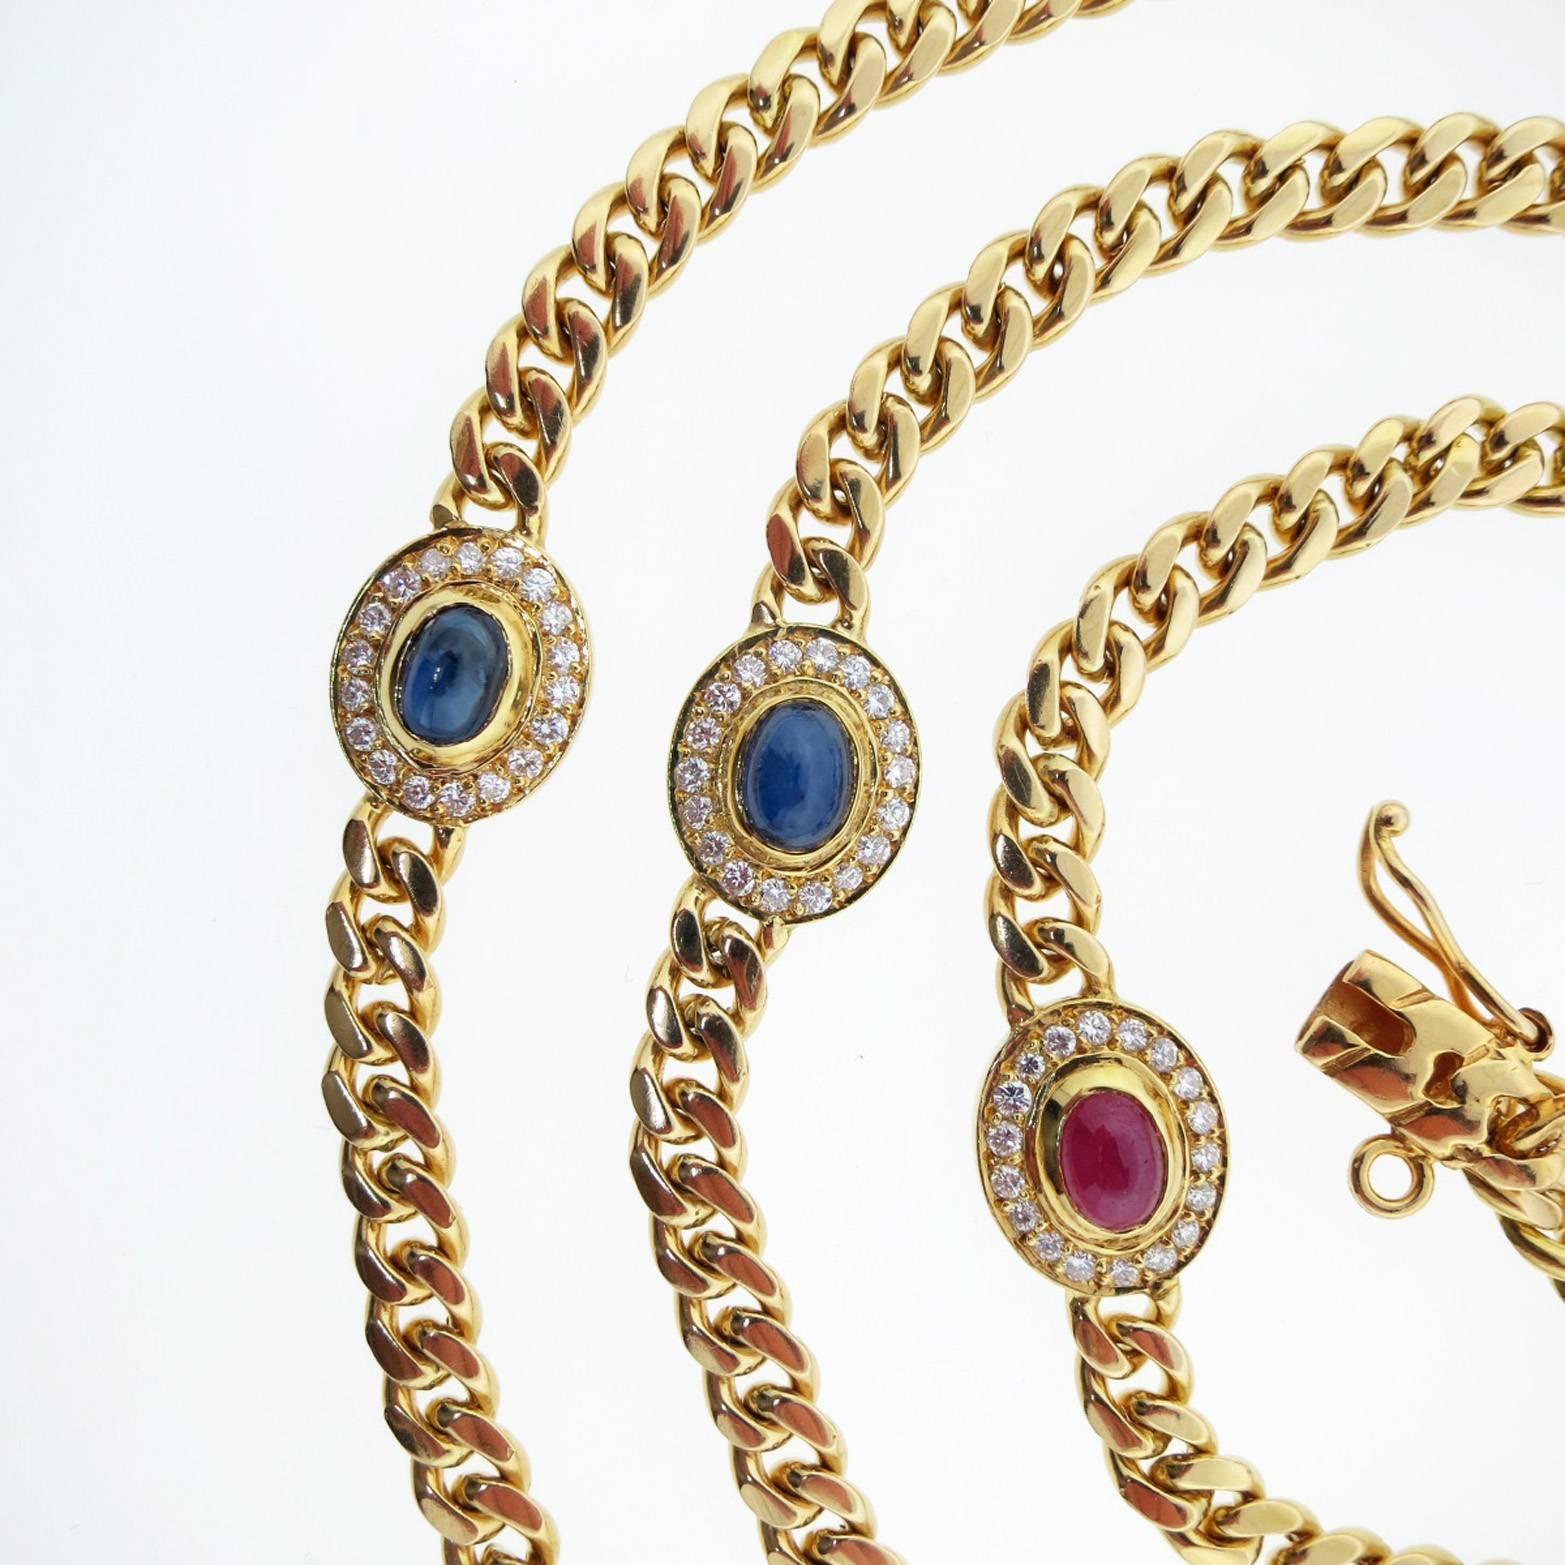 18kt. yellow gold curb link necklace measuring 35 inches in length weighing 107.4 gr. The necklace is set with two alternating cabochon sapphire, emeralds and rubies and is surrounded with 18 bead set round brilliant cut diamonds totaling approx.